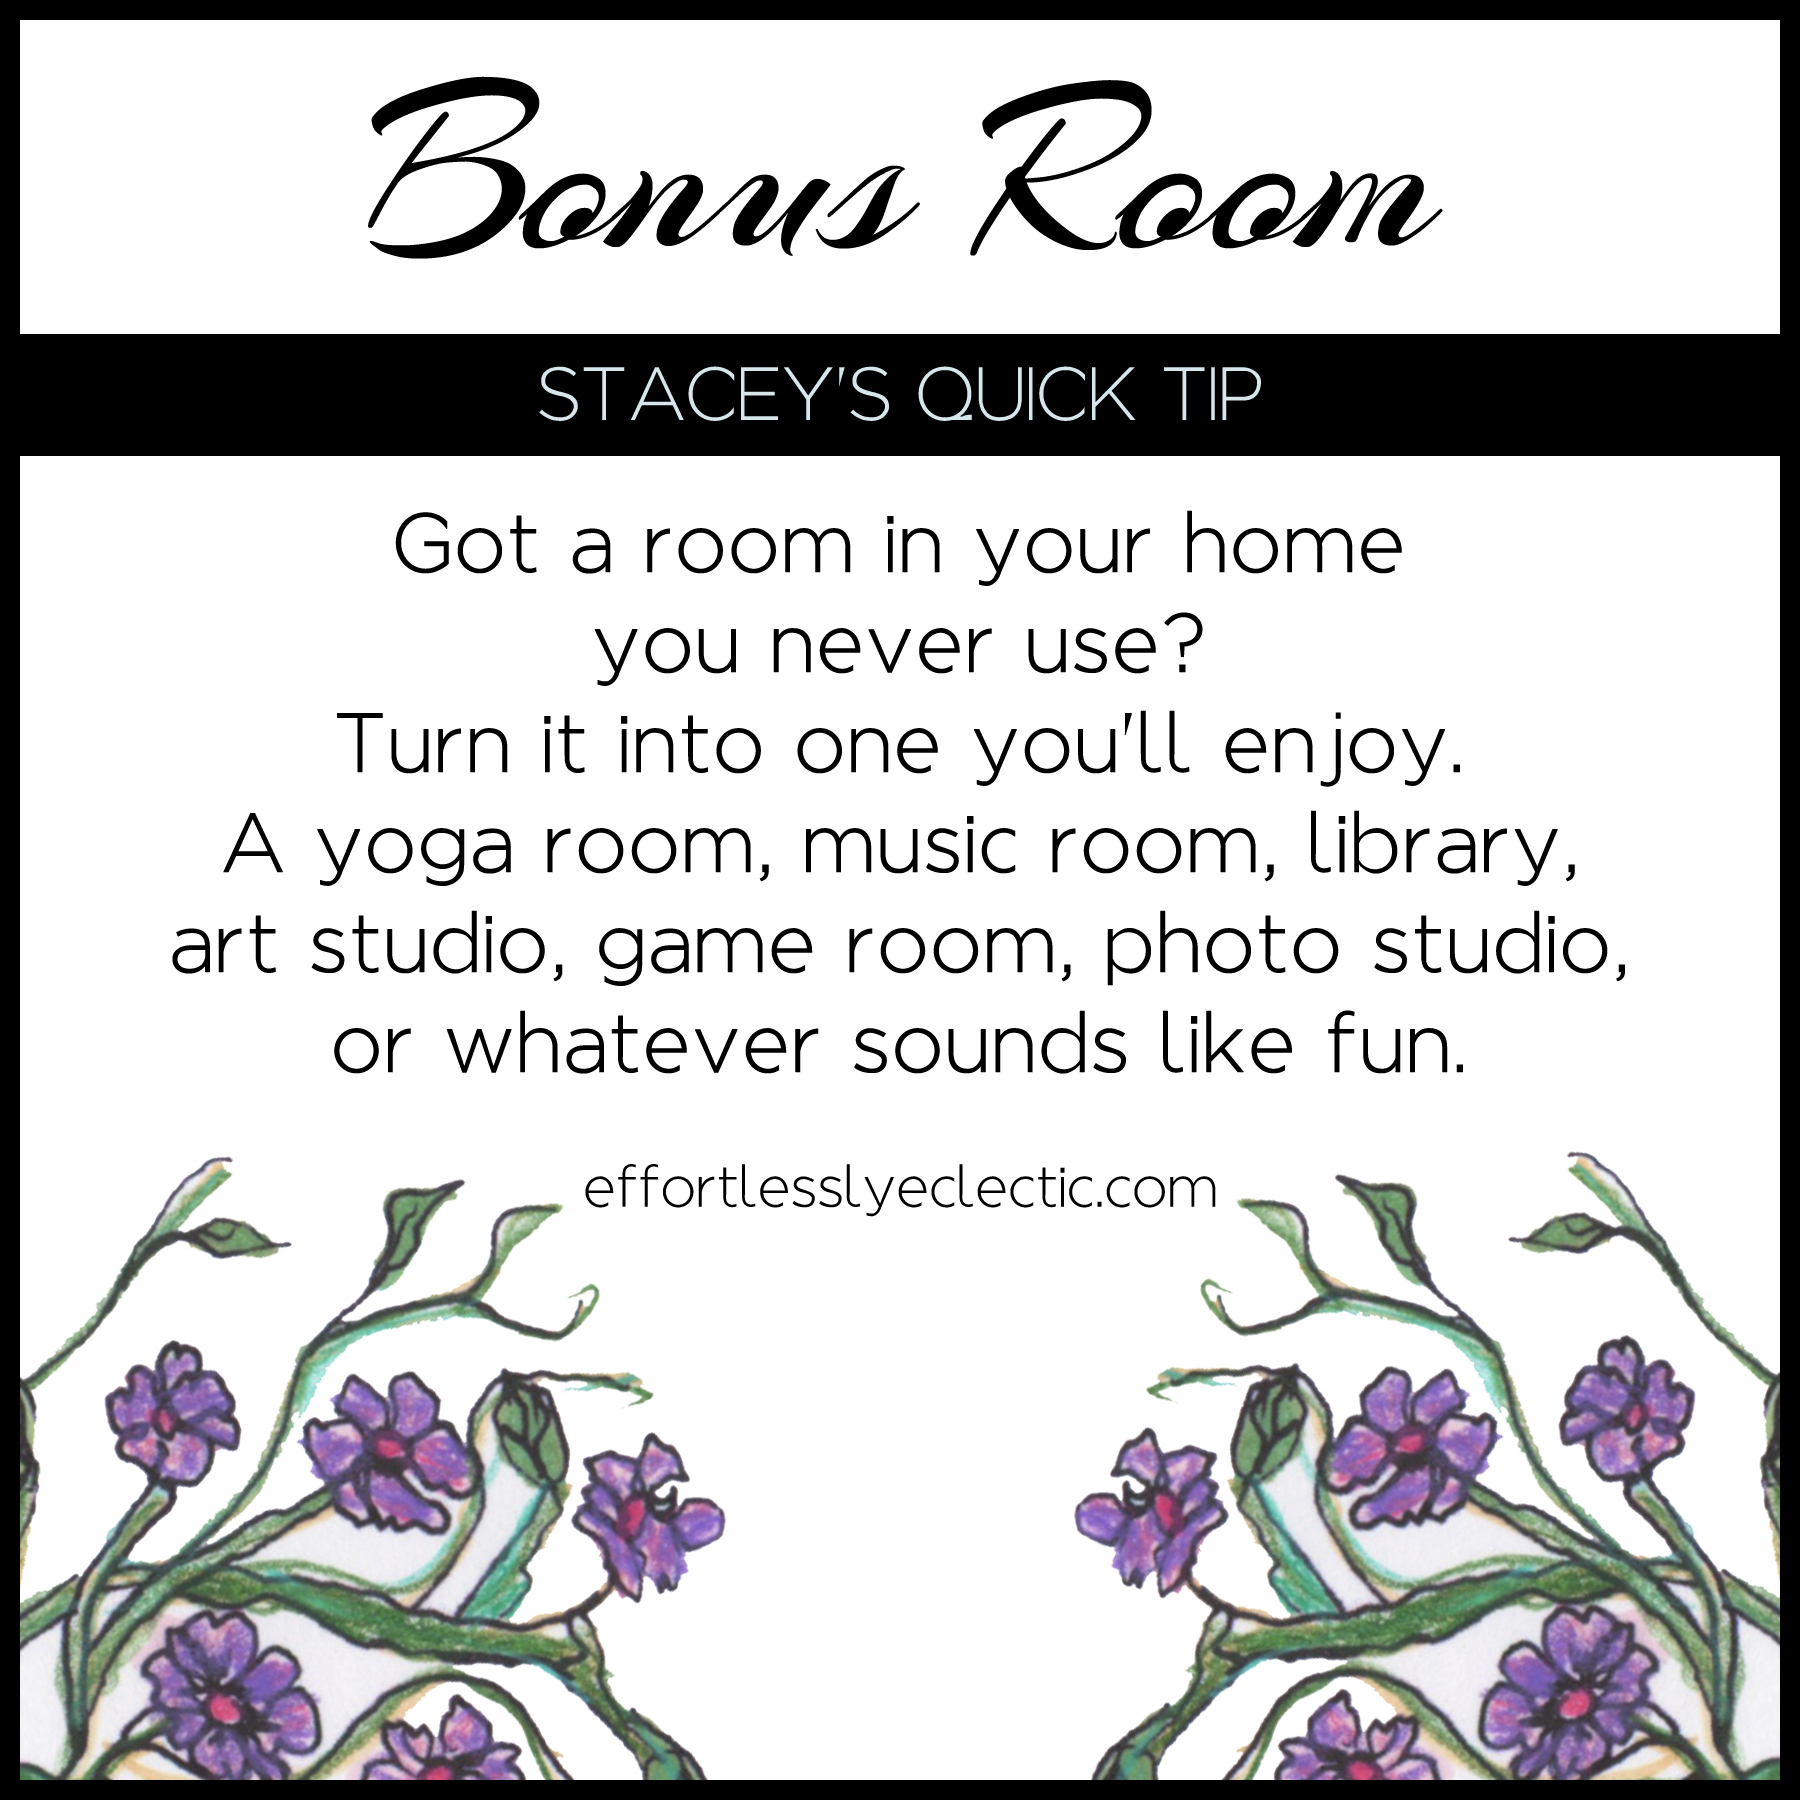 Bonus Room - A home decorating tip about what to do with extra rooms in your home